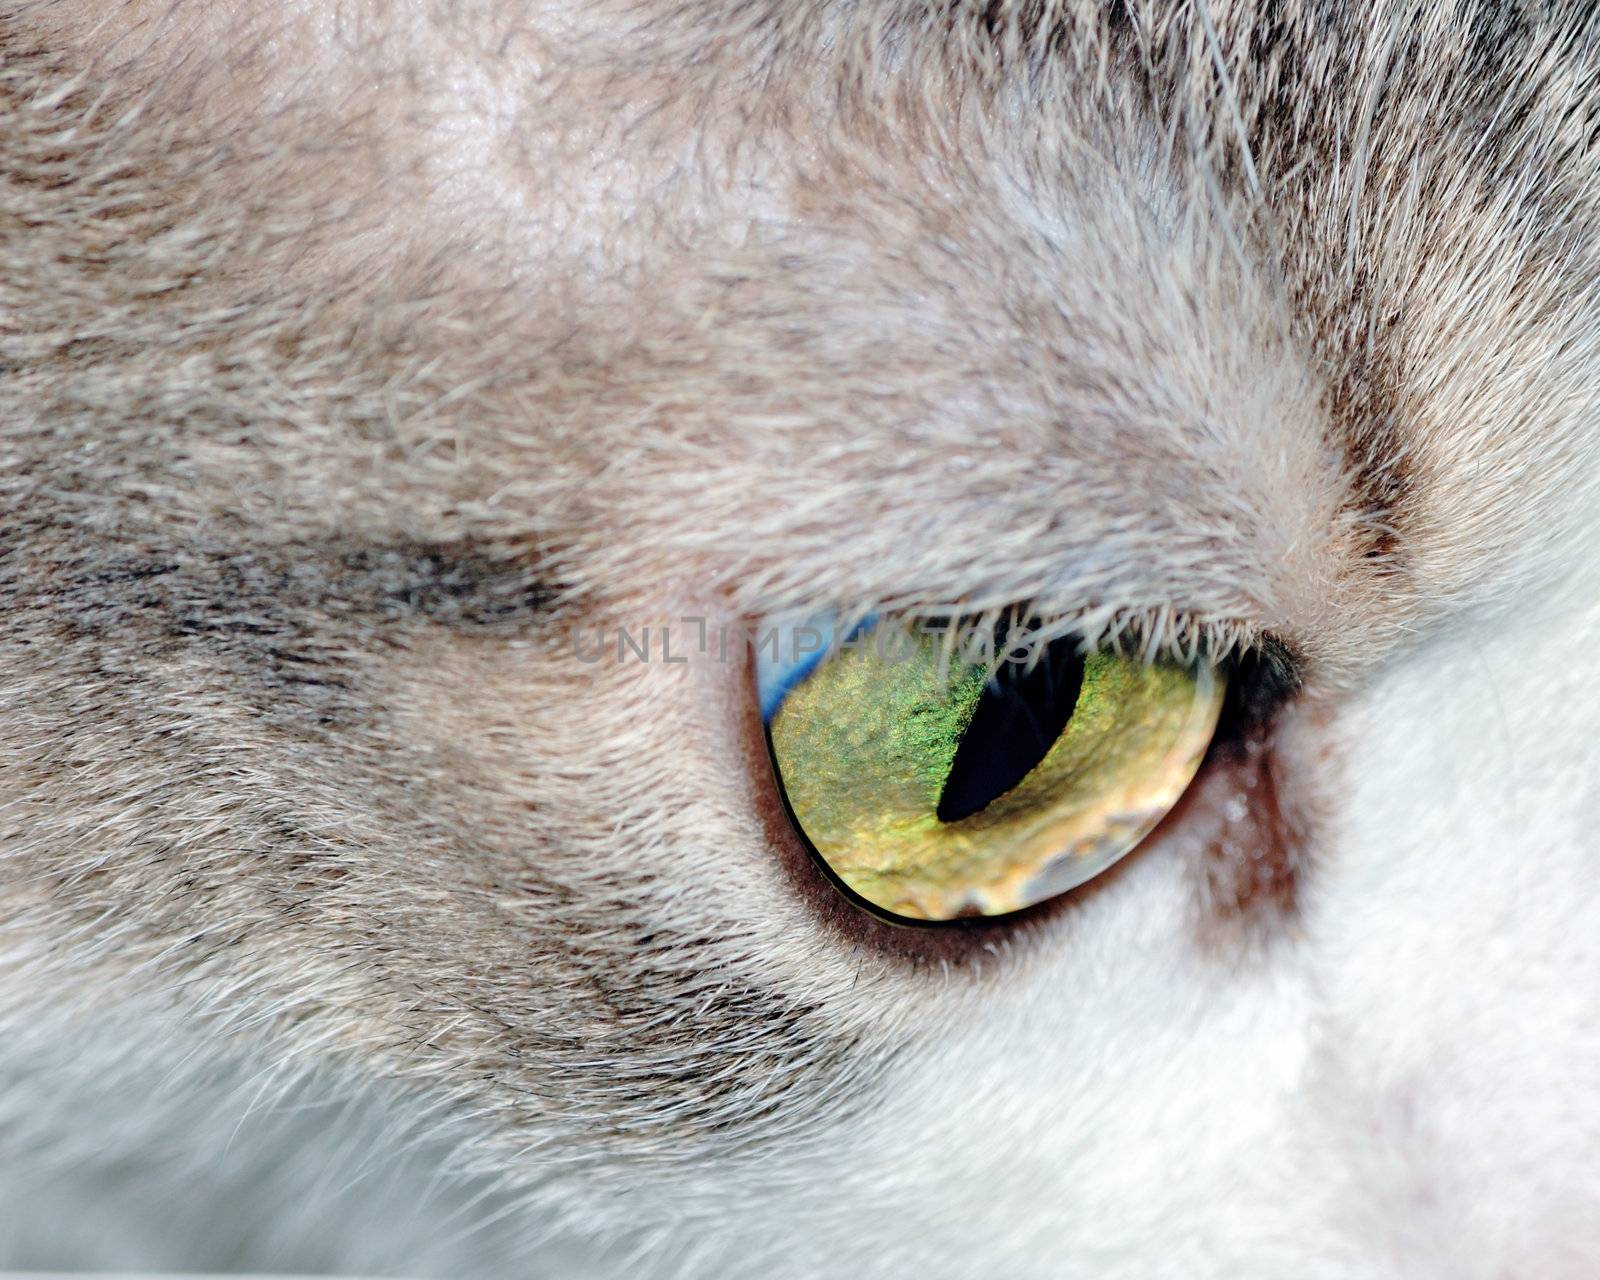 A close-up head shot of a domestic house cat's eye.